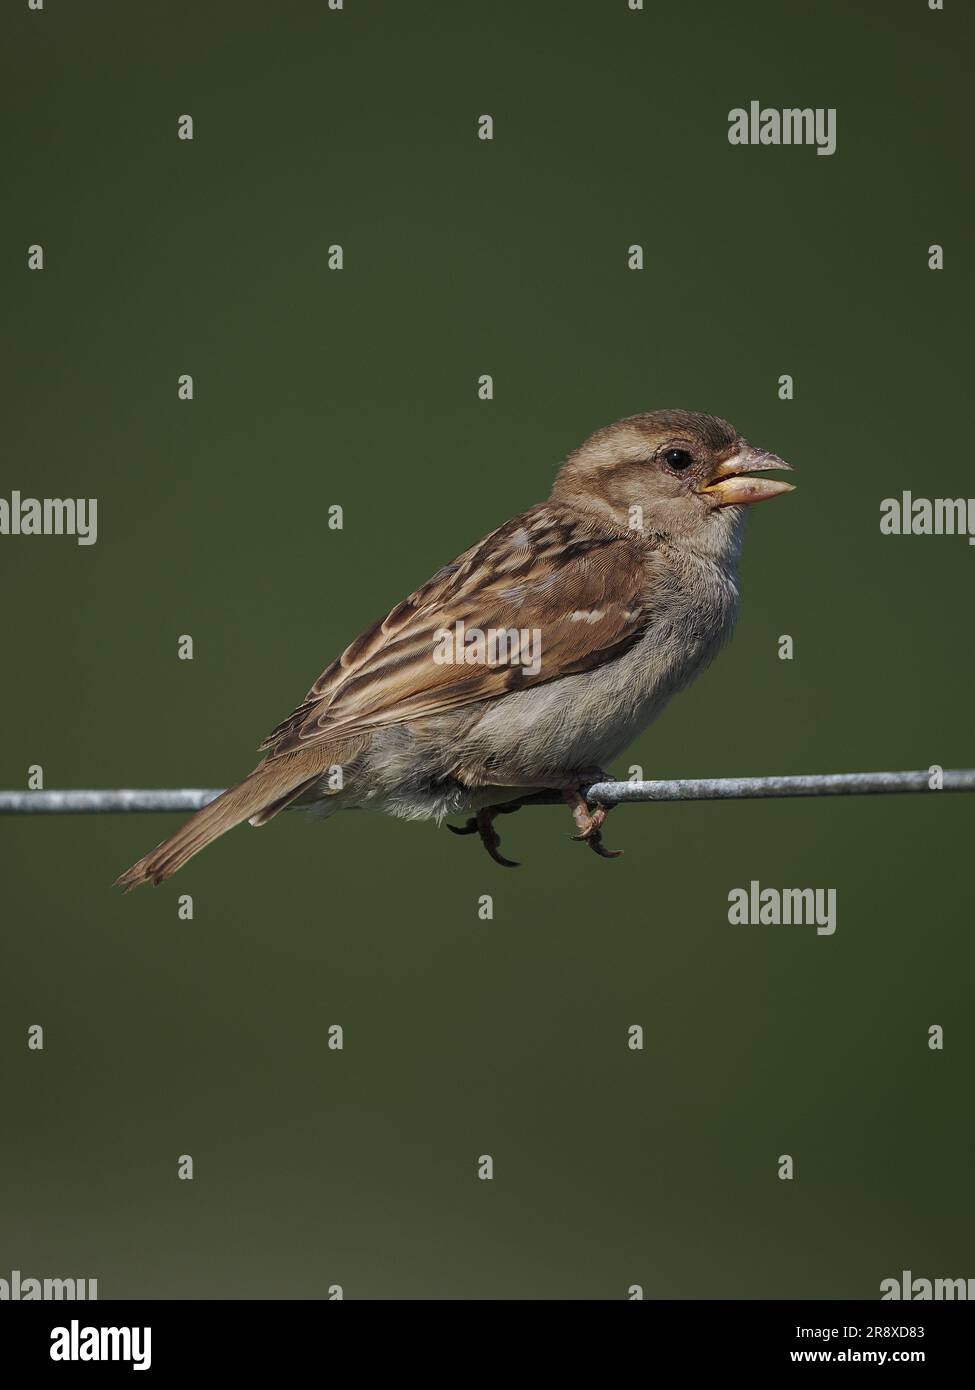 With high winds in the NW of Scotland the house sparrows have adapted to hover over high grass/nettles searching for invertebrate prey. Stock Photo